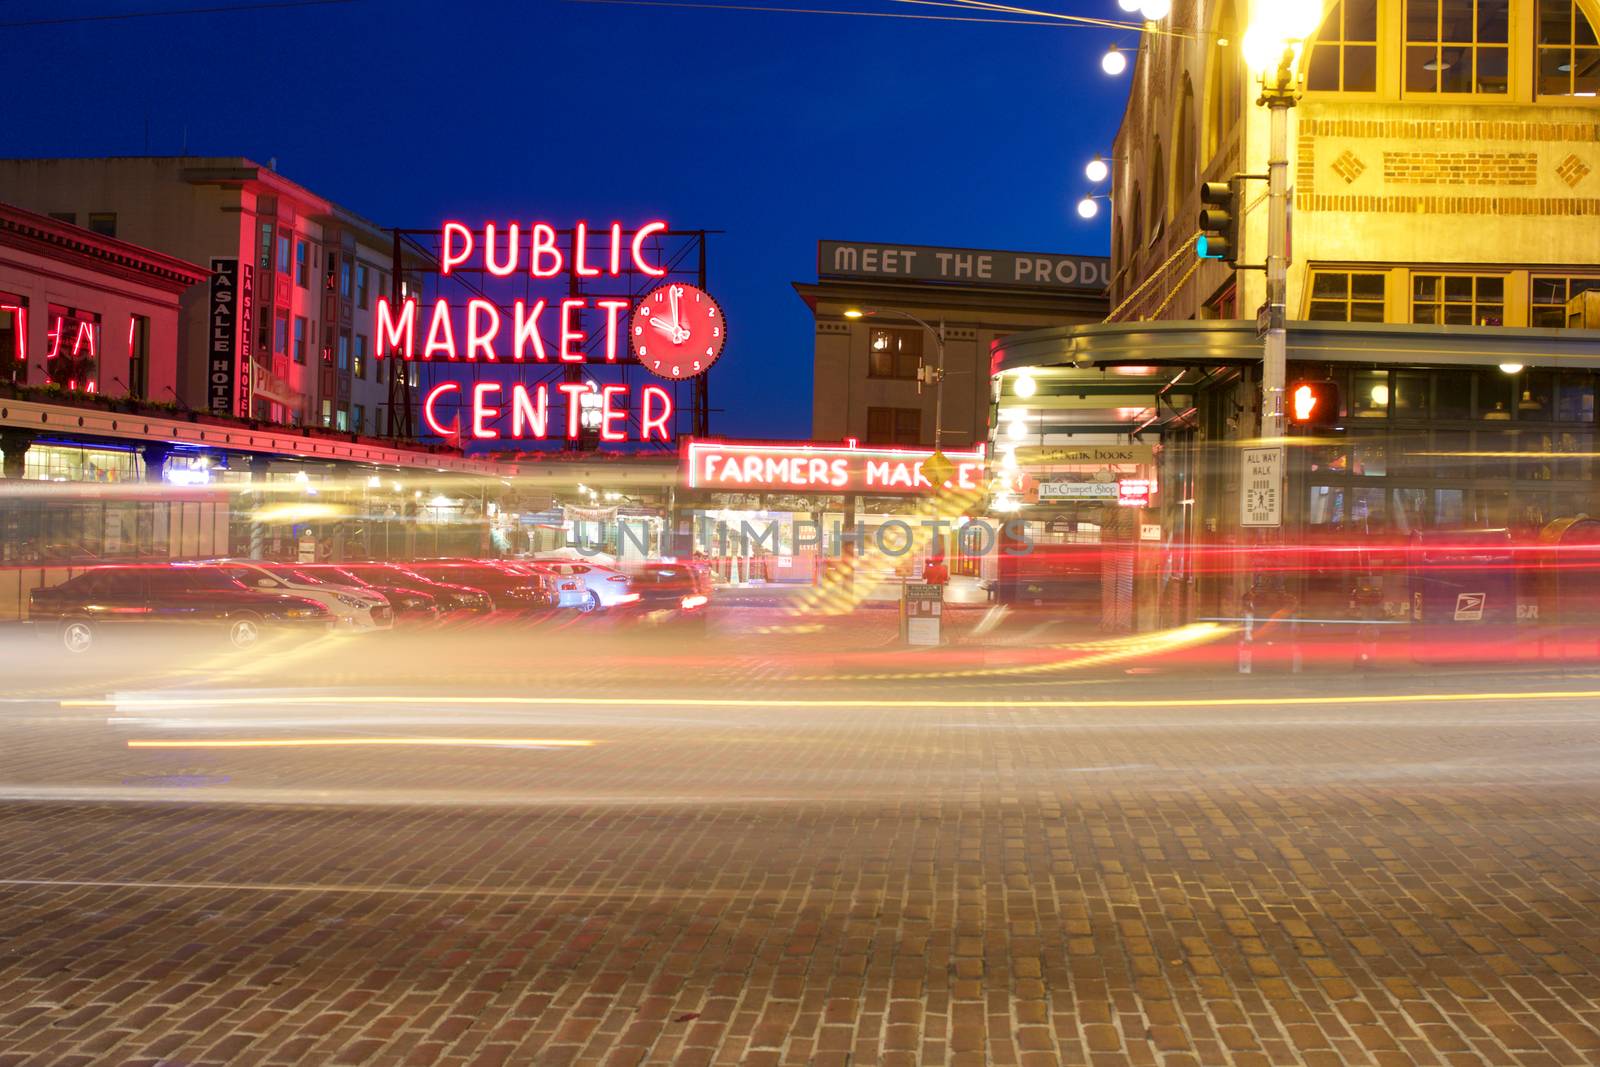 Seattle, WA - July 24, 2015 - Pike Place Public Market Center Sign at Night with Light Trails